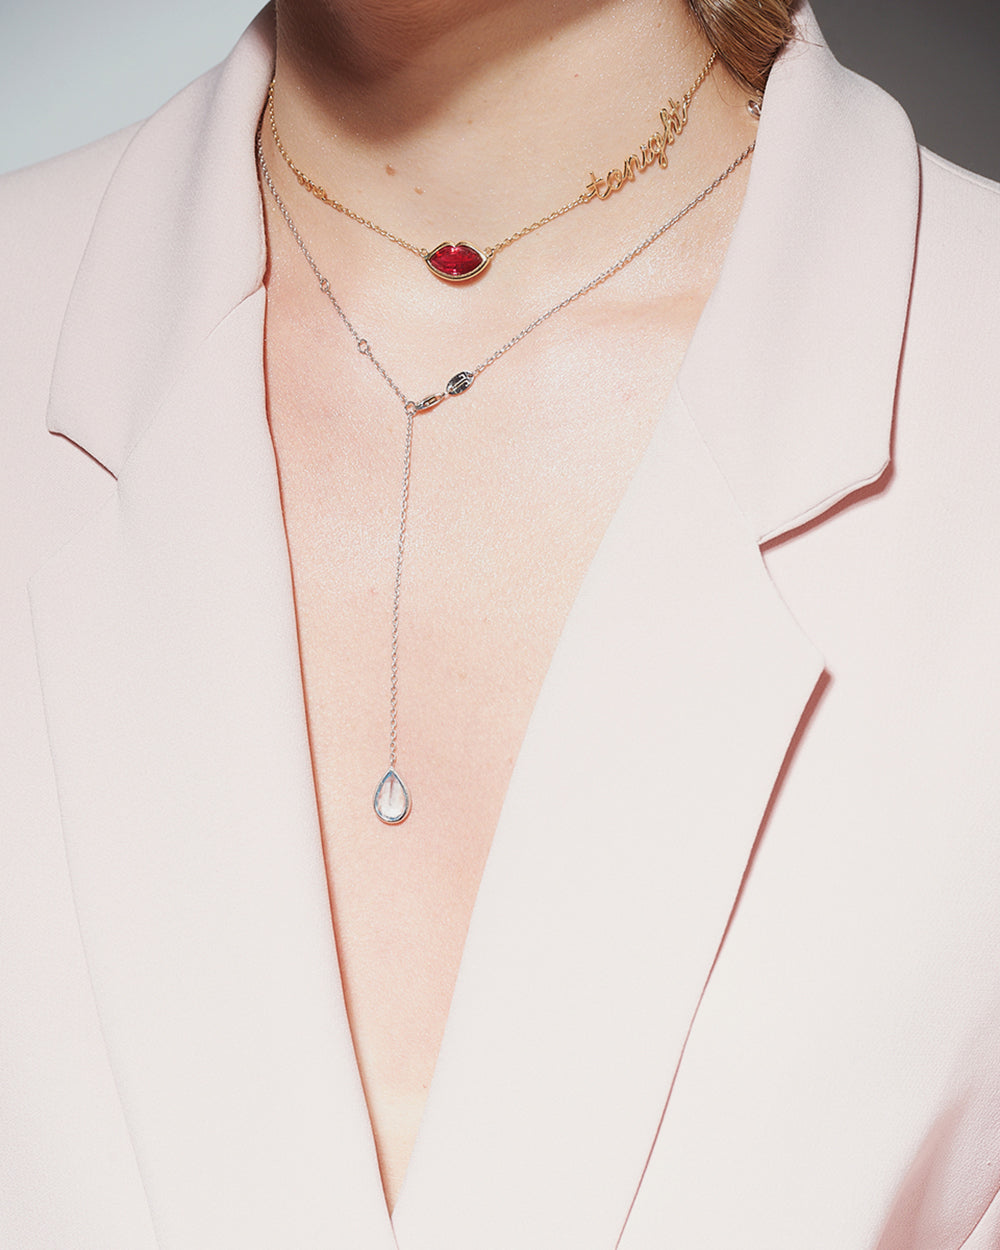 LM11 Necklace Kiss me tonight